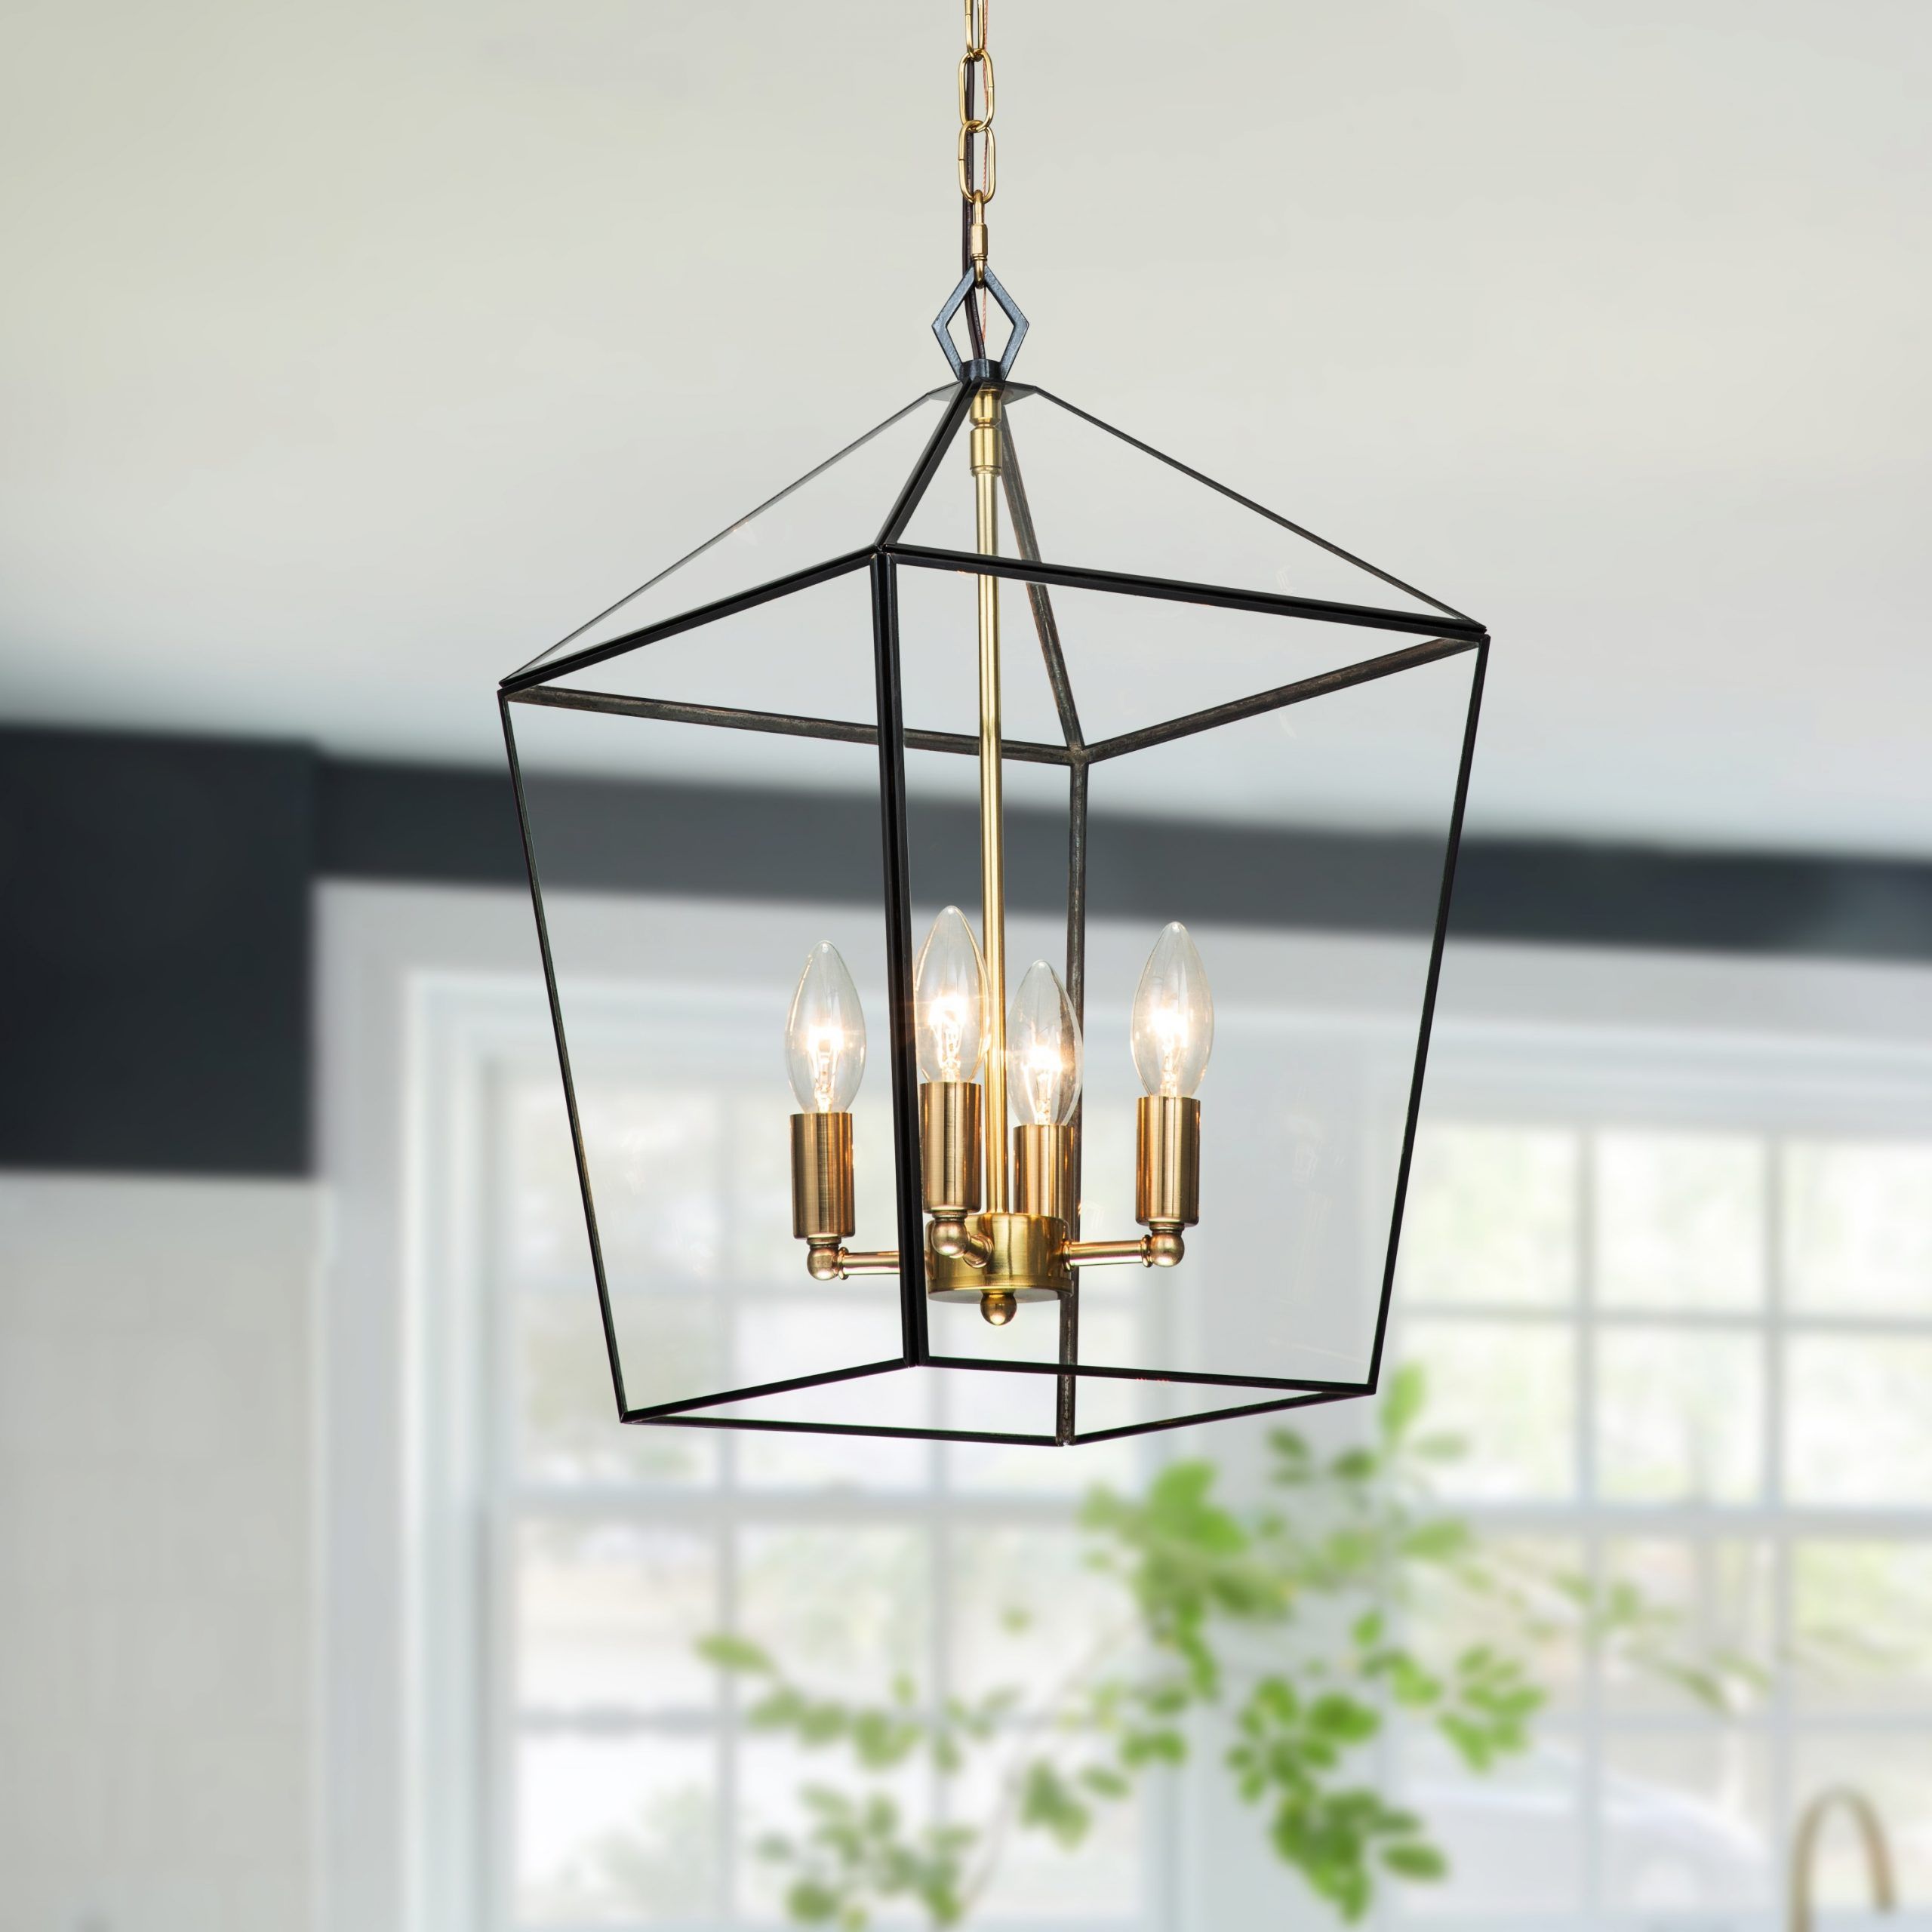 Best And Newest Brass Lantern Chandeliers Intended For 4 Light Brass Lantern Pendant With Clear Tempered Glass Panes – W12" X E12"  X H (View 6 of 10)